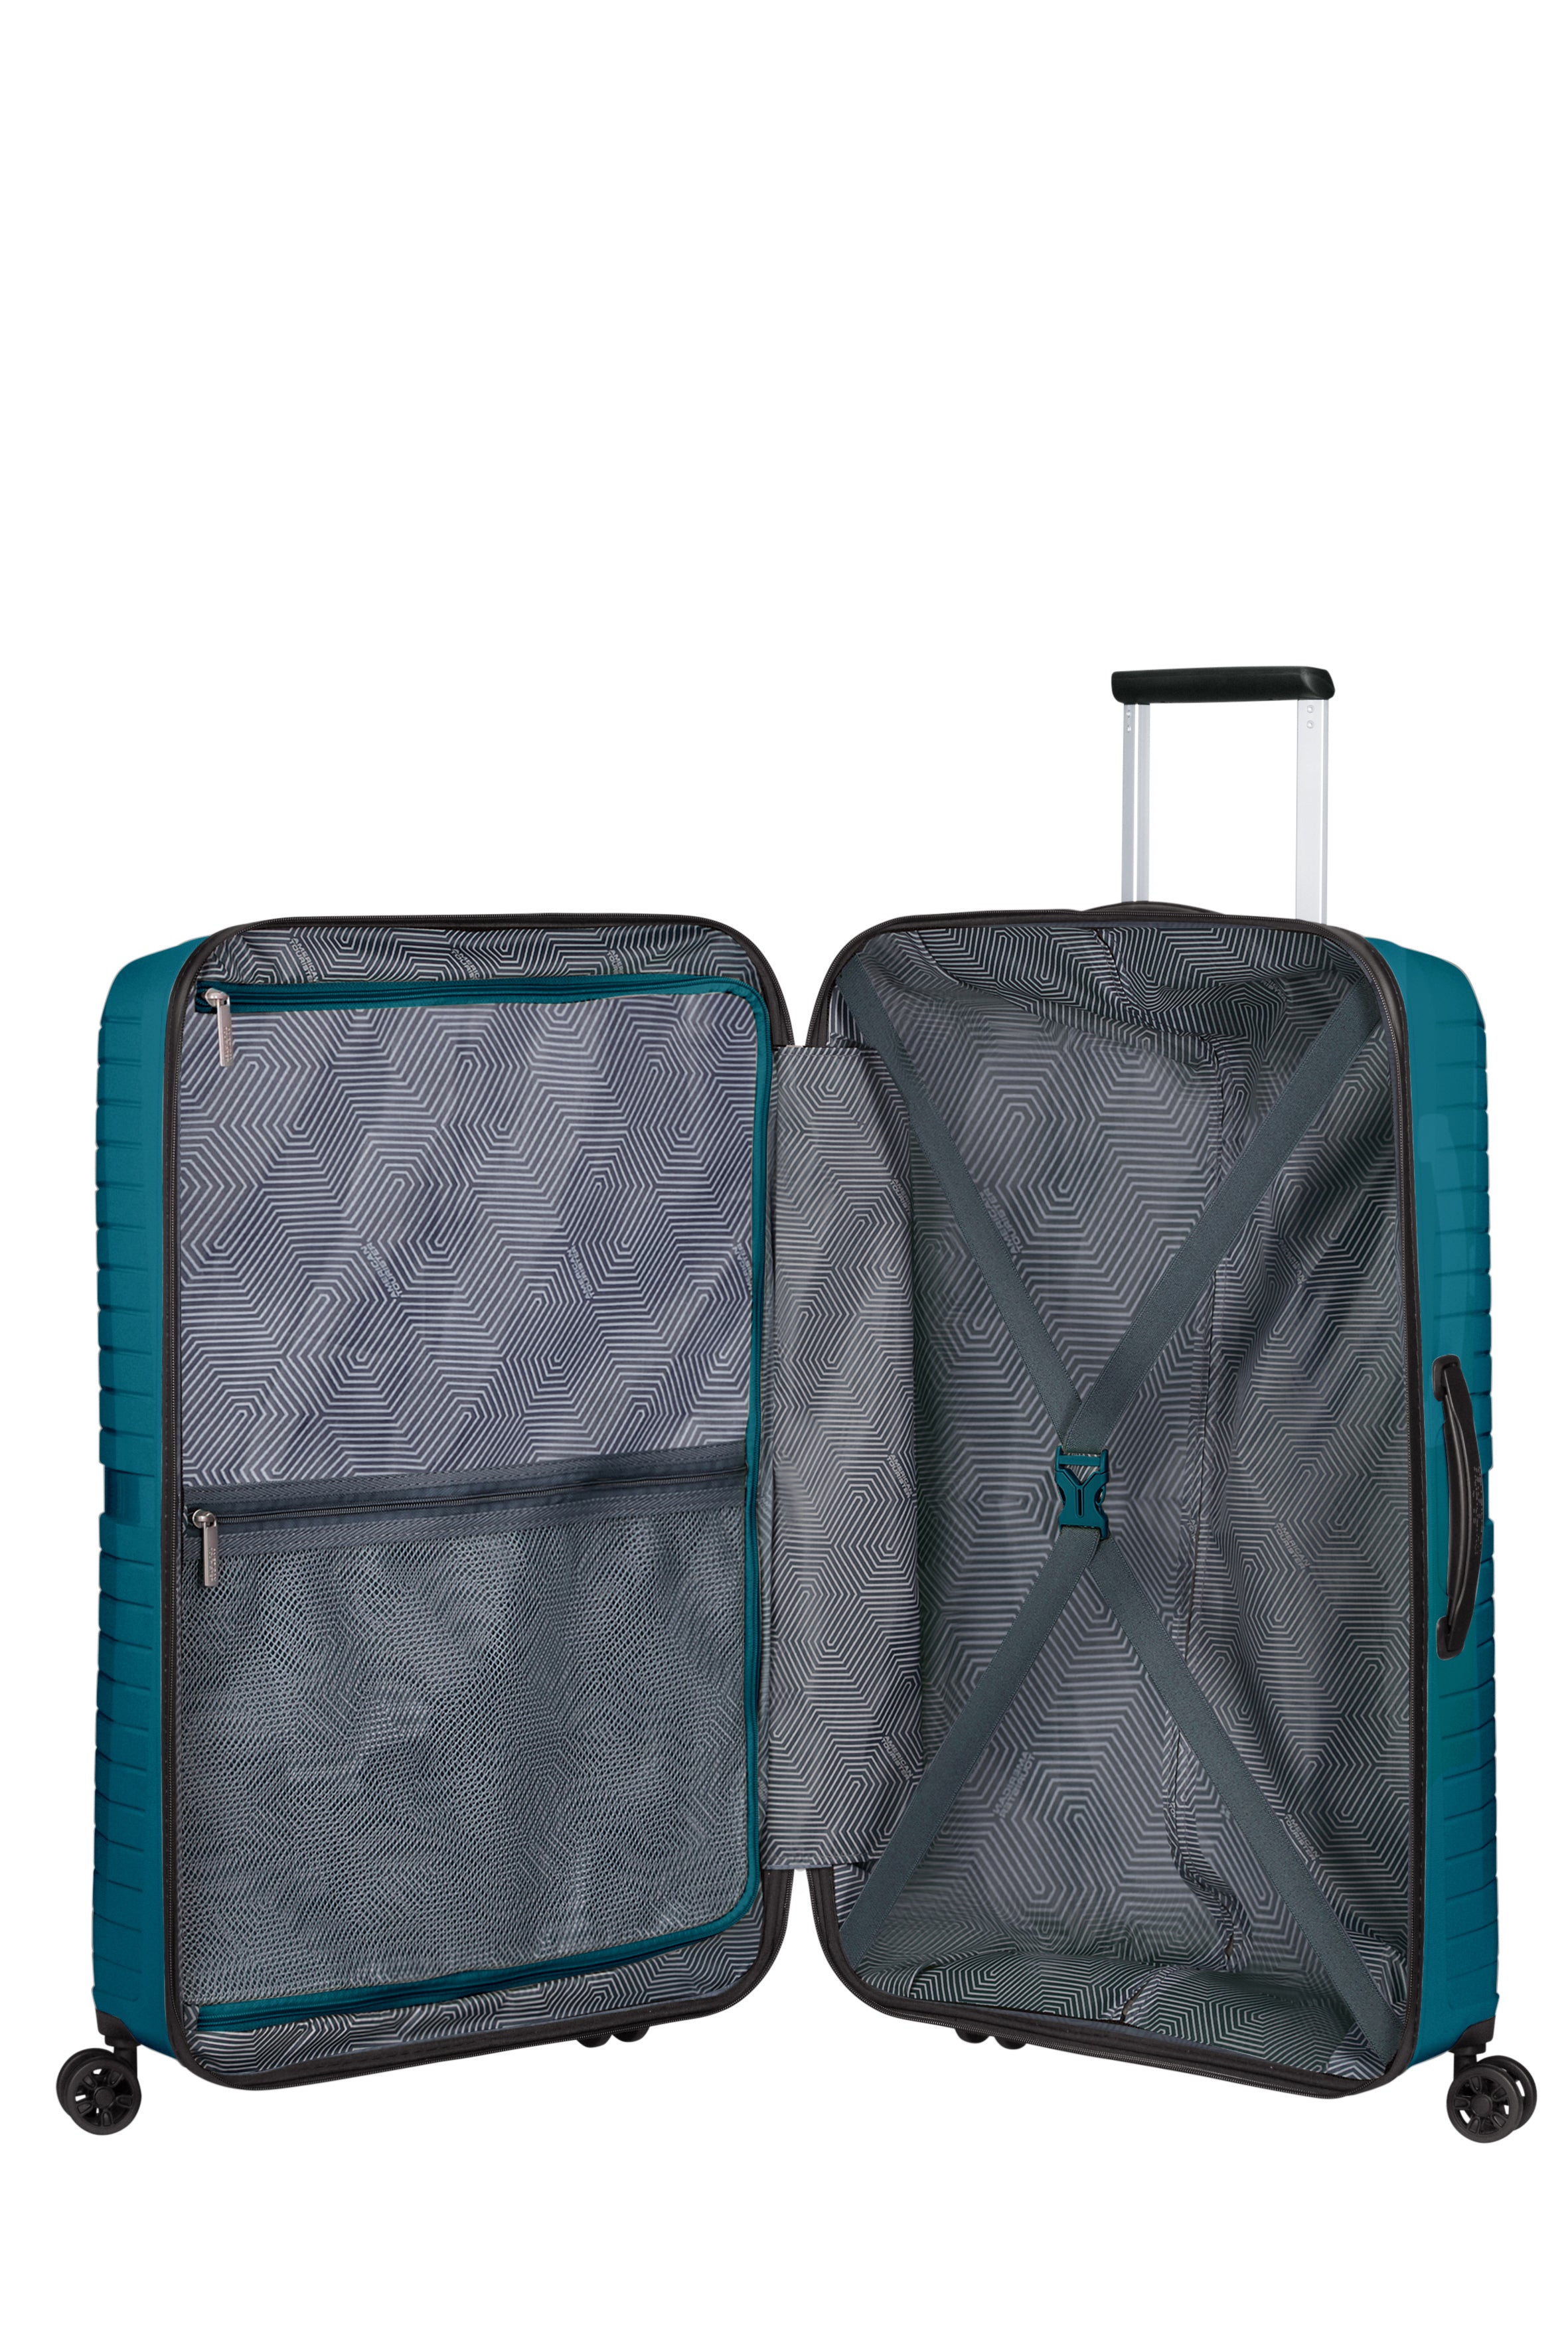 American Tourister - Airconic 77cm Large Suitcase - Deep Ocean-6